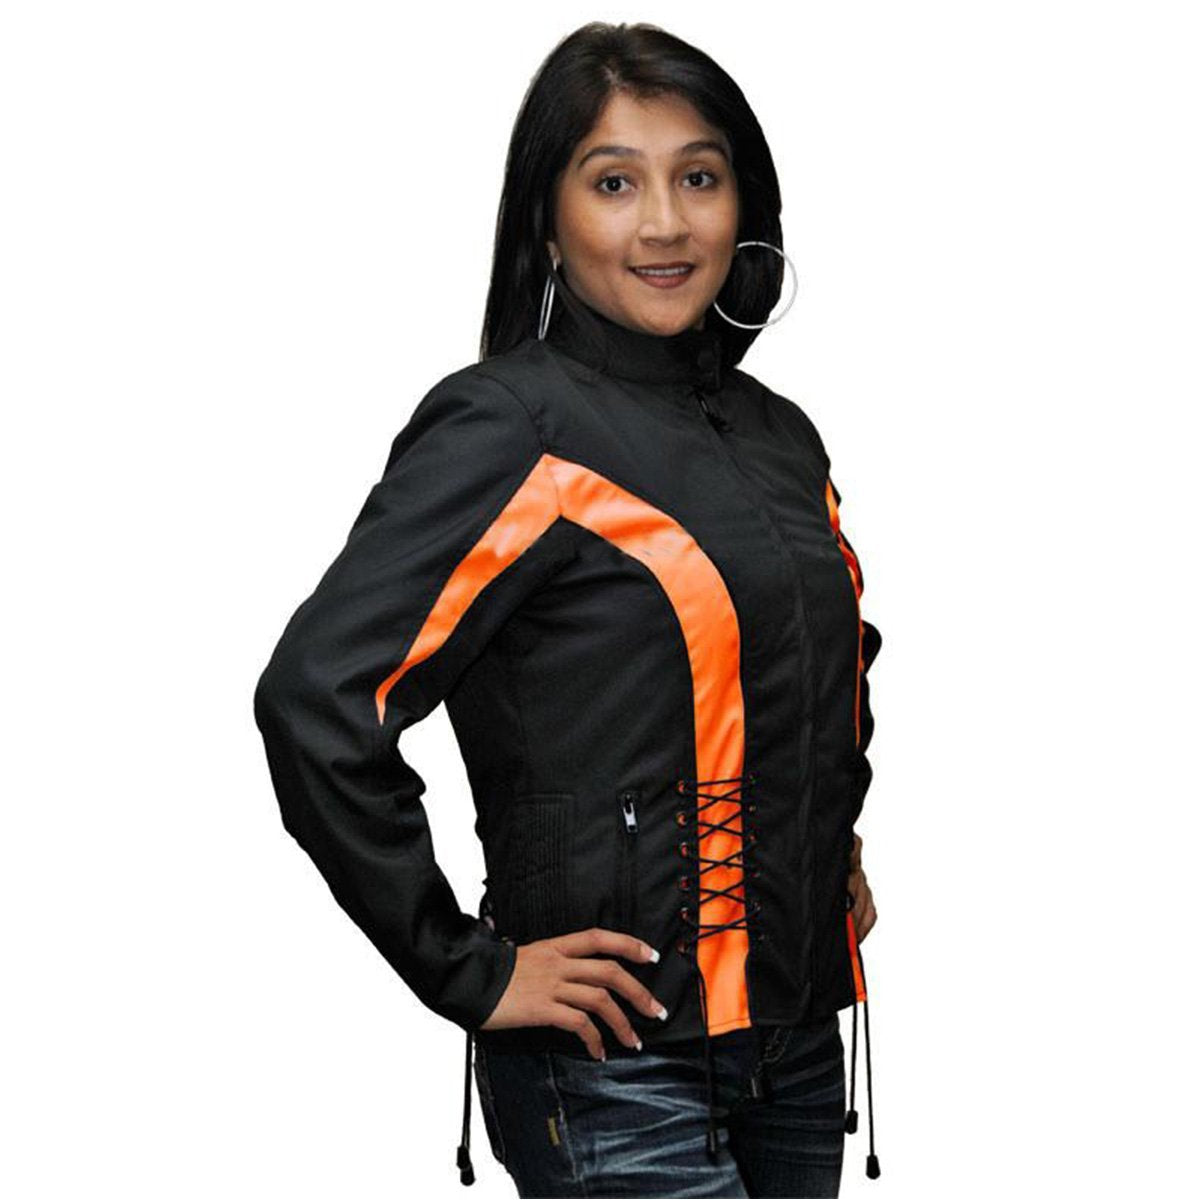 Vance Leather Ladies Textile Crystal Jacket with Color Accents